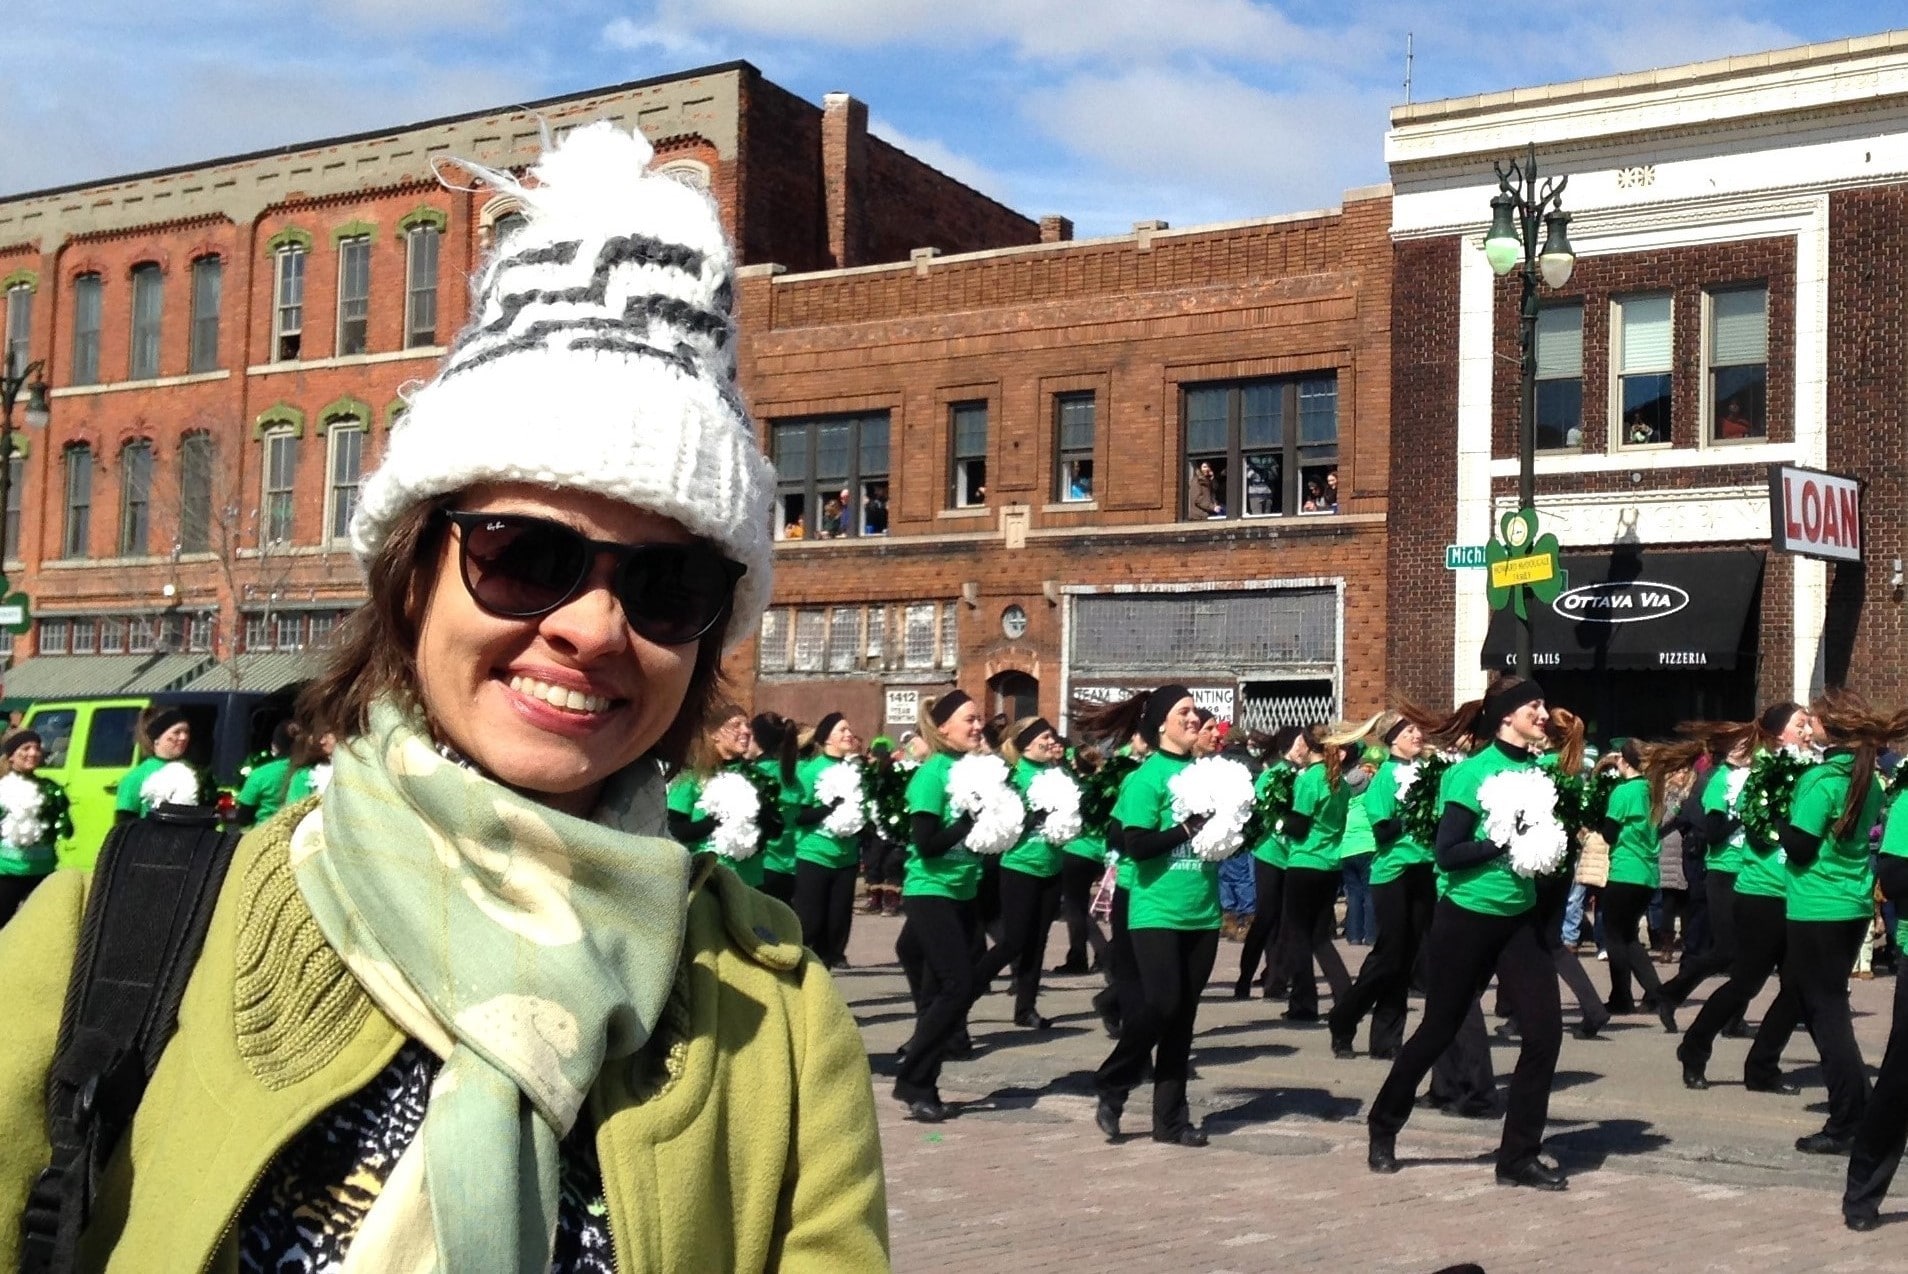 Detroit visitor is on Michigan Avenue to view the popular annual St. Patrick's Day Parade.